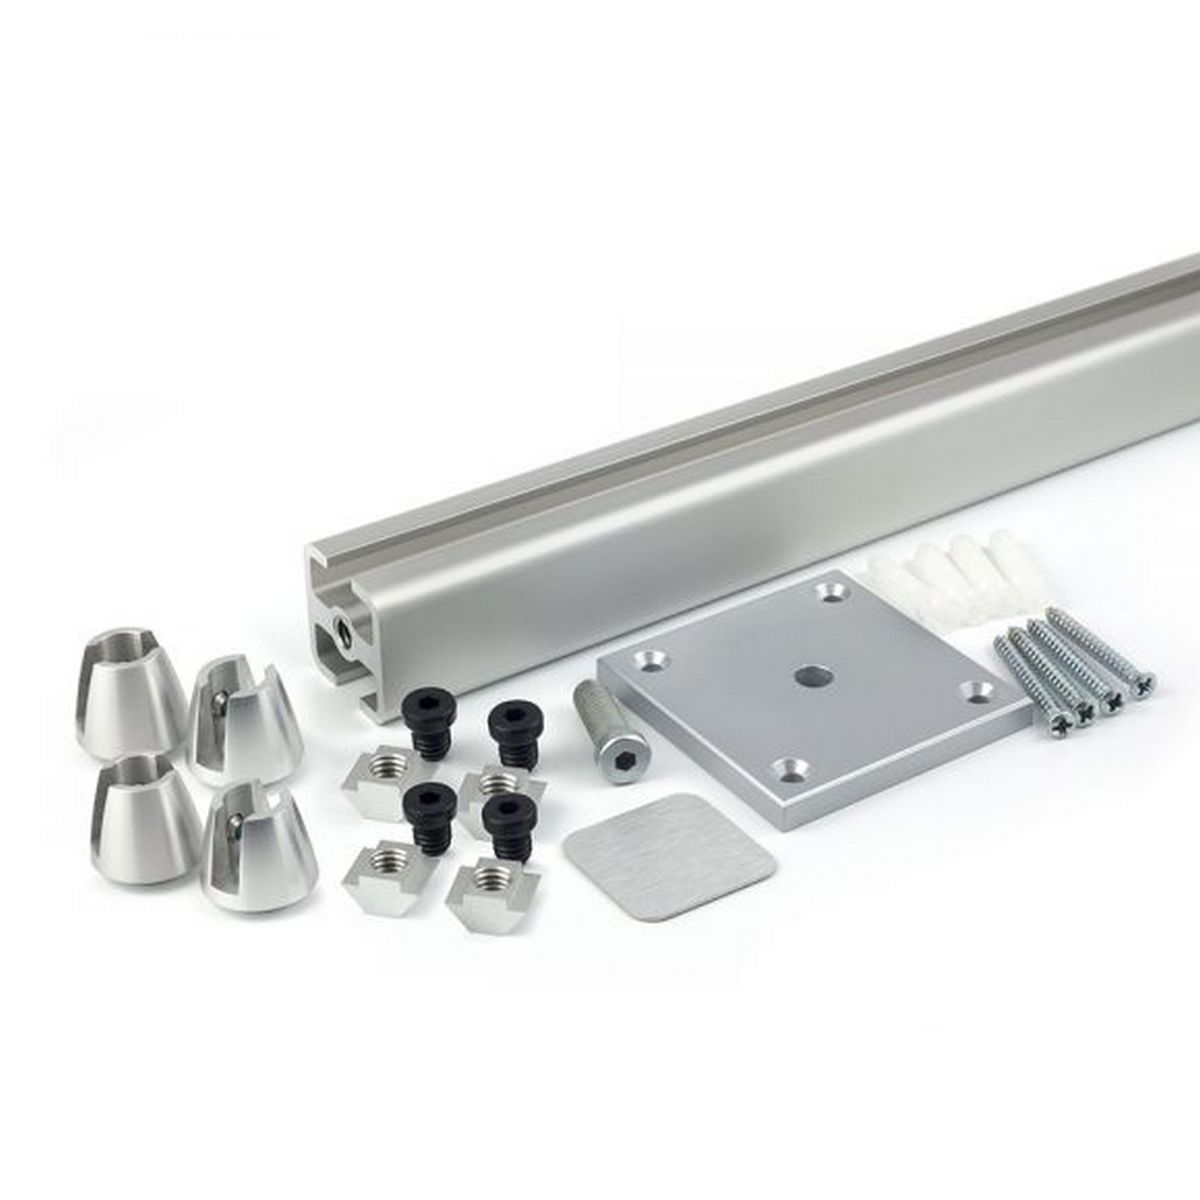 Gyford Double Blade Sign Hardware Kit ~ StructureLight